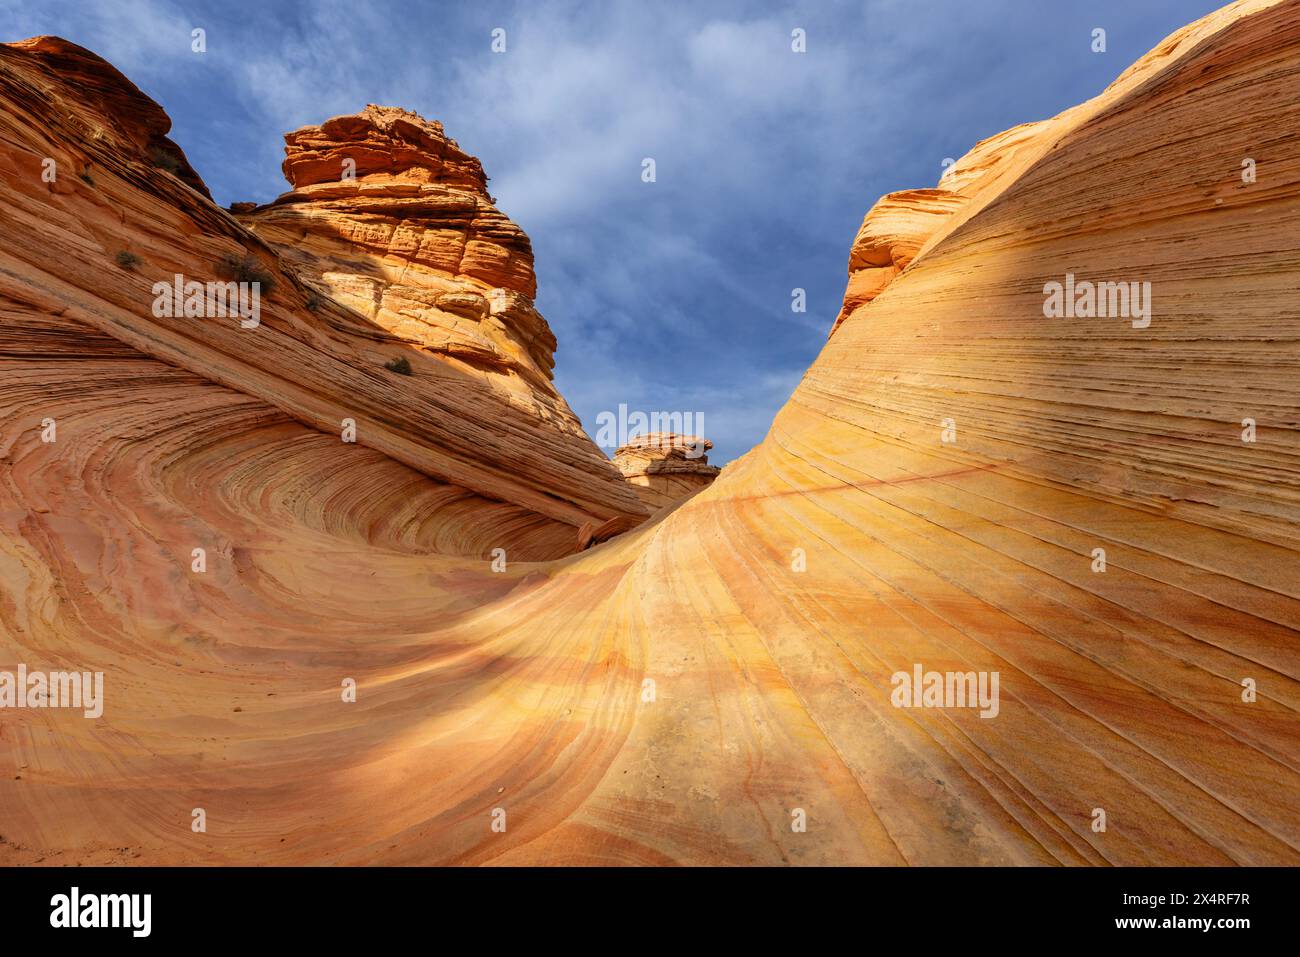 Southern Wave am South Coyote Buttes am Paria Canyon, Vermilion Cliffs National Monument, Arizona, USA Stockfoto